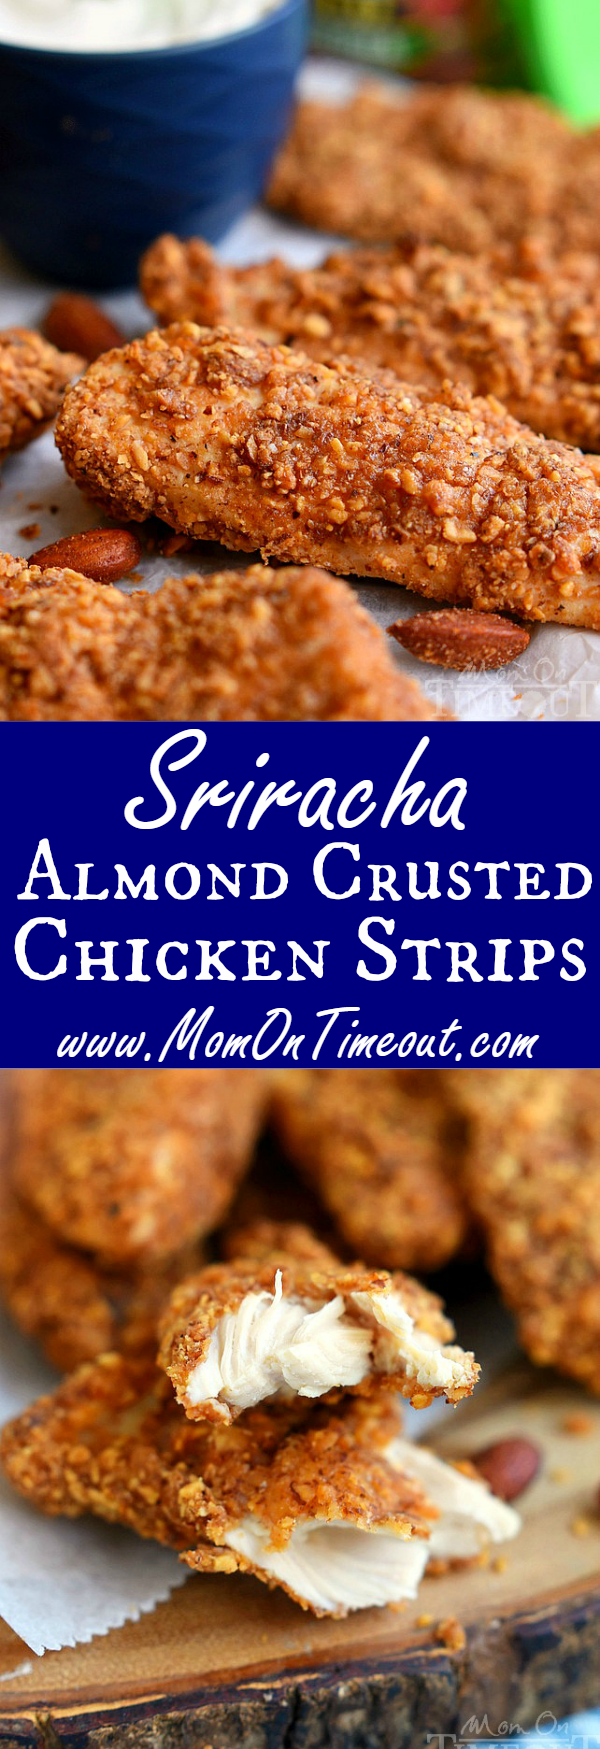 Sriracha Almond Crusted Chicken Strips Mom On Timeout